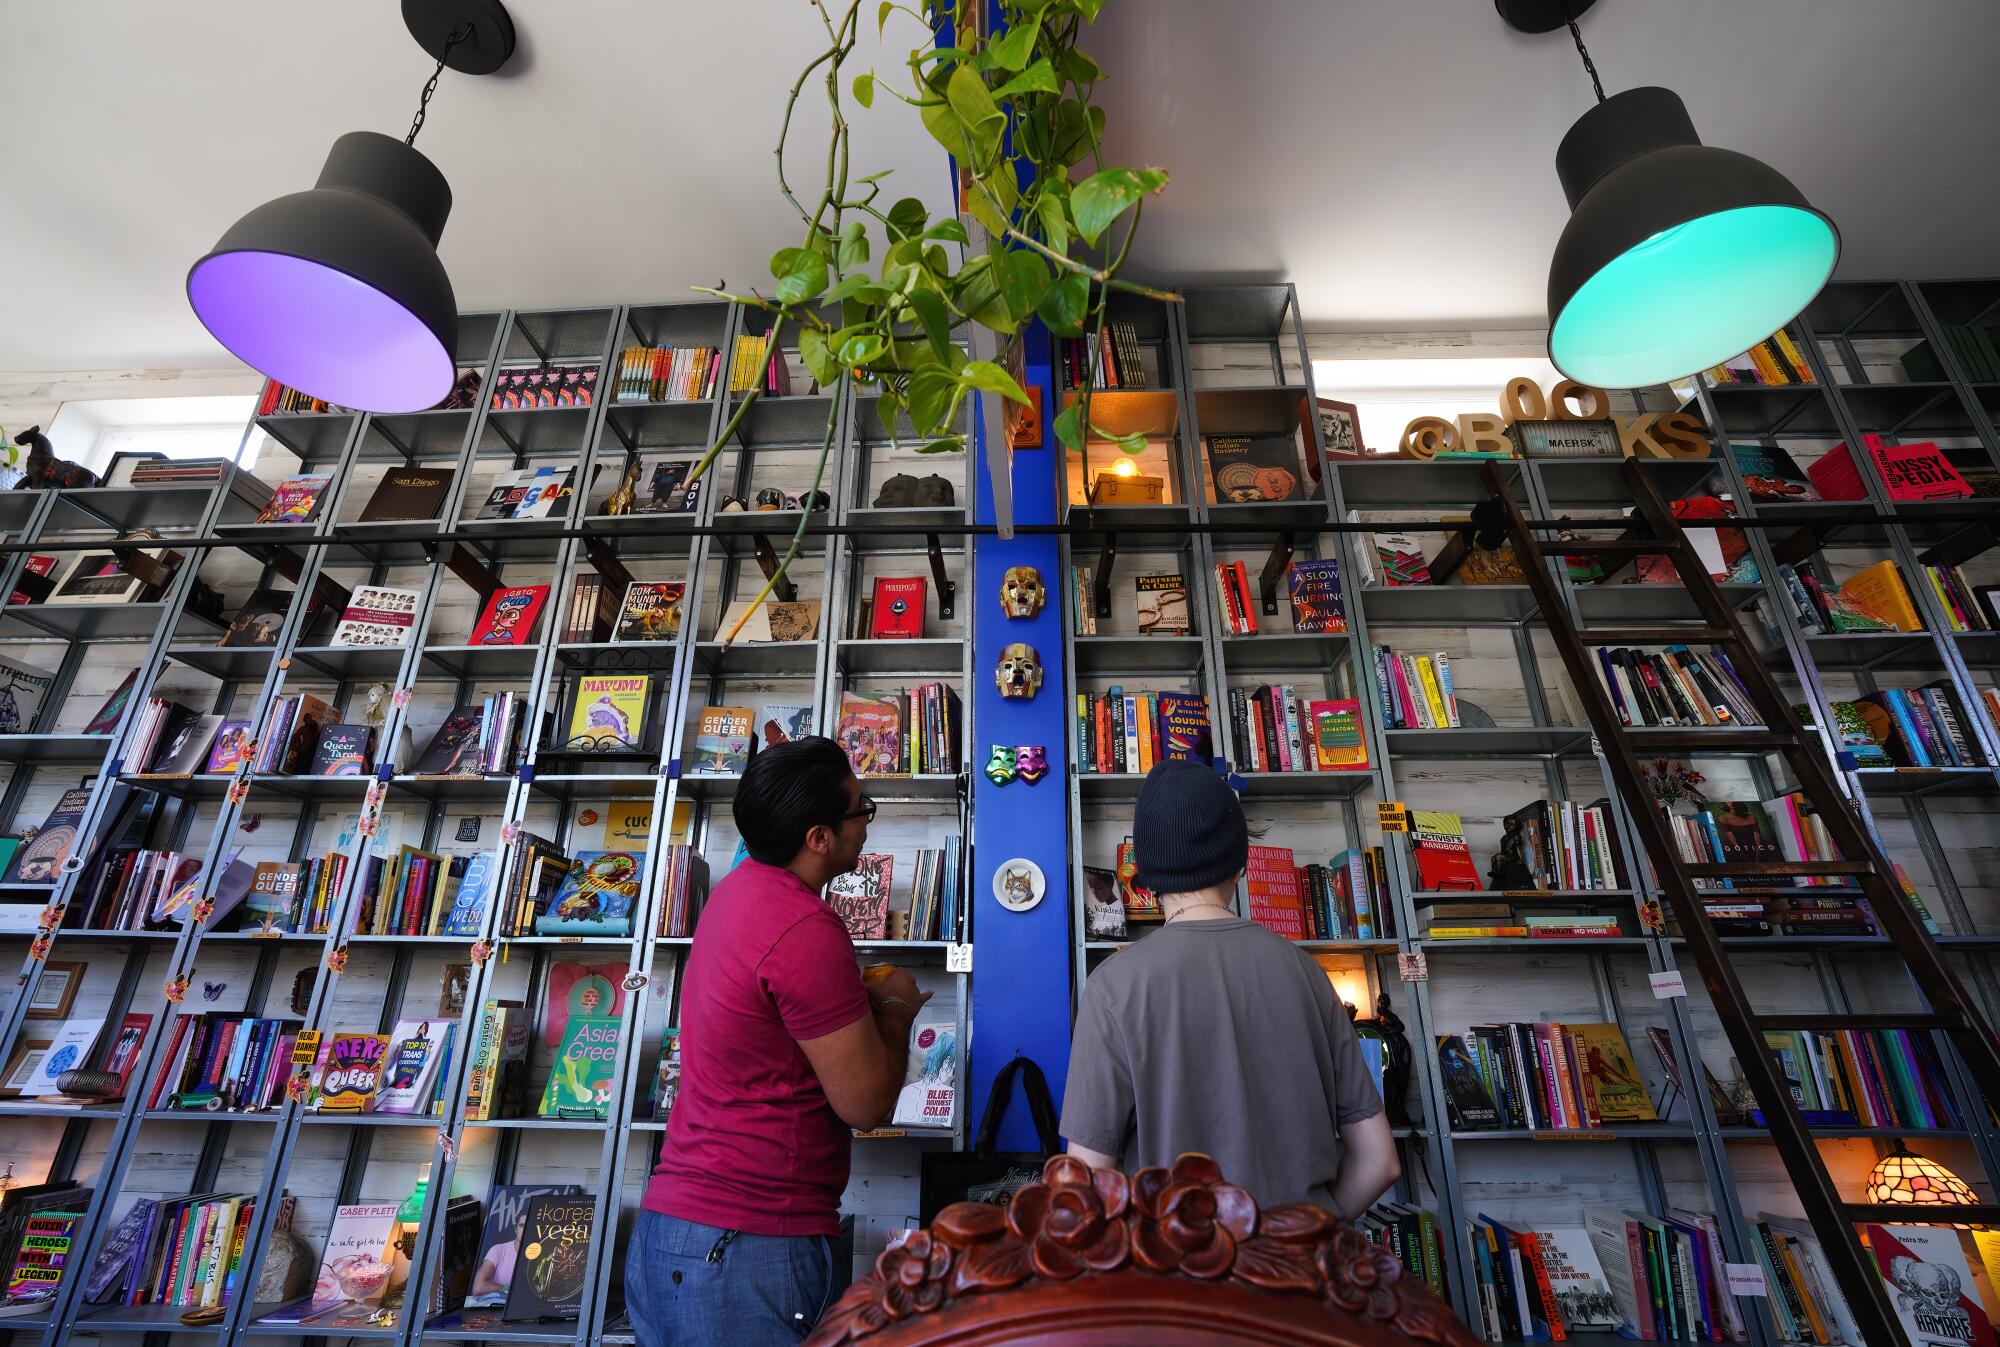 Customers shop at Libélula bookstore, a 700-square-foot space in the Barrio Logan Community in San Diego, CA.